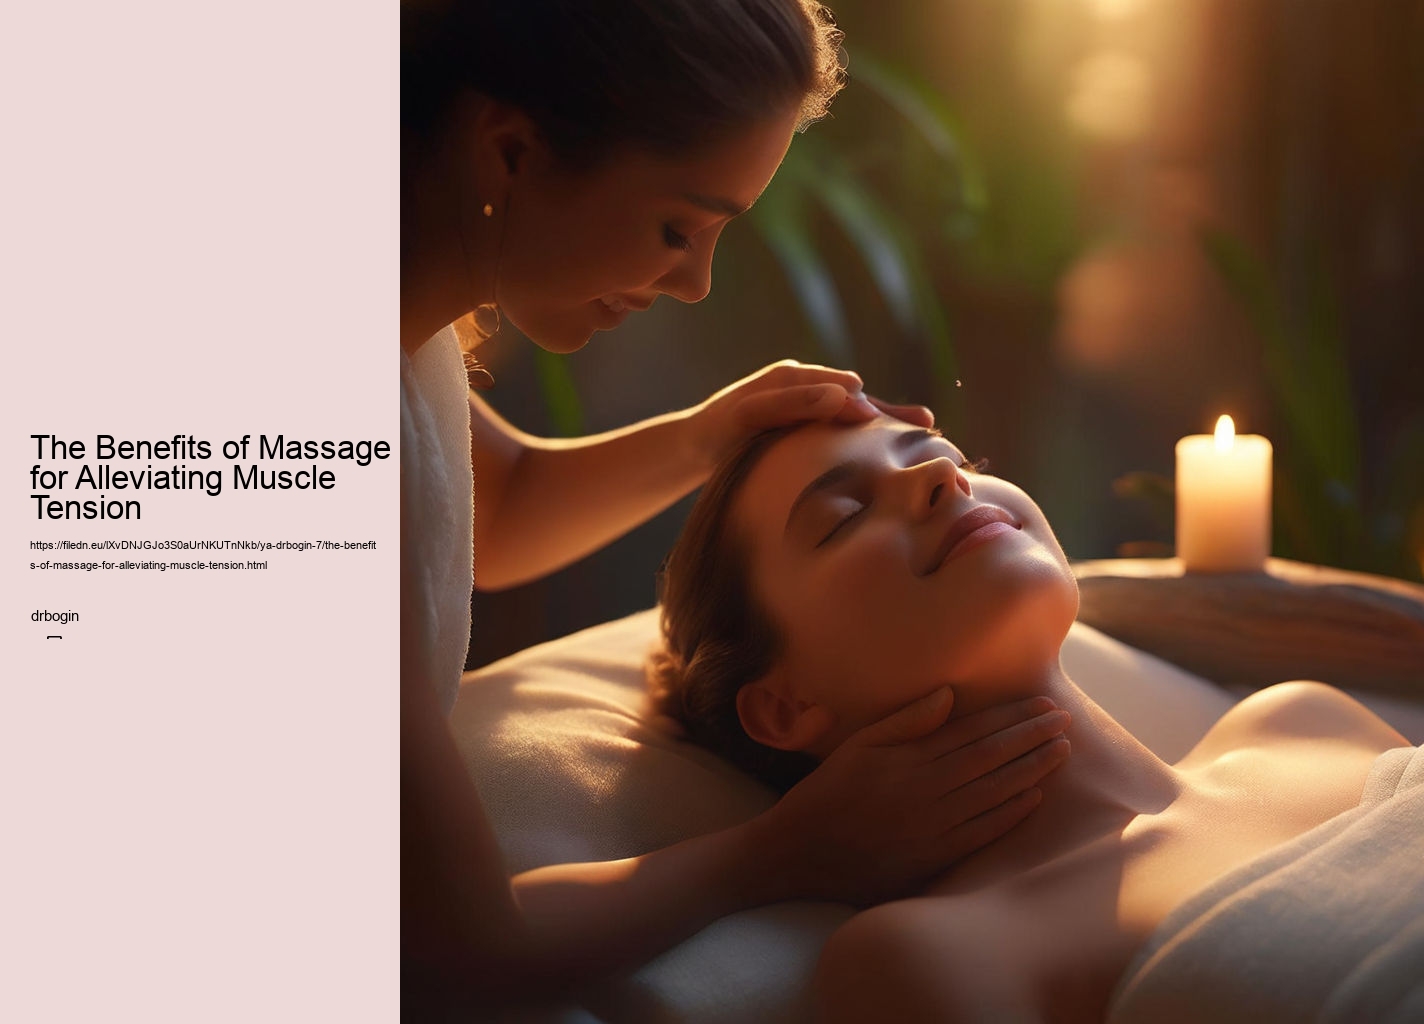 The Benefits of Massage for Alleviating Muscle Tension